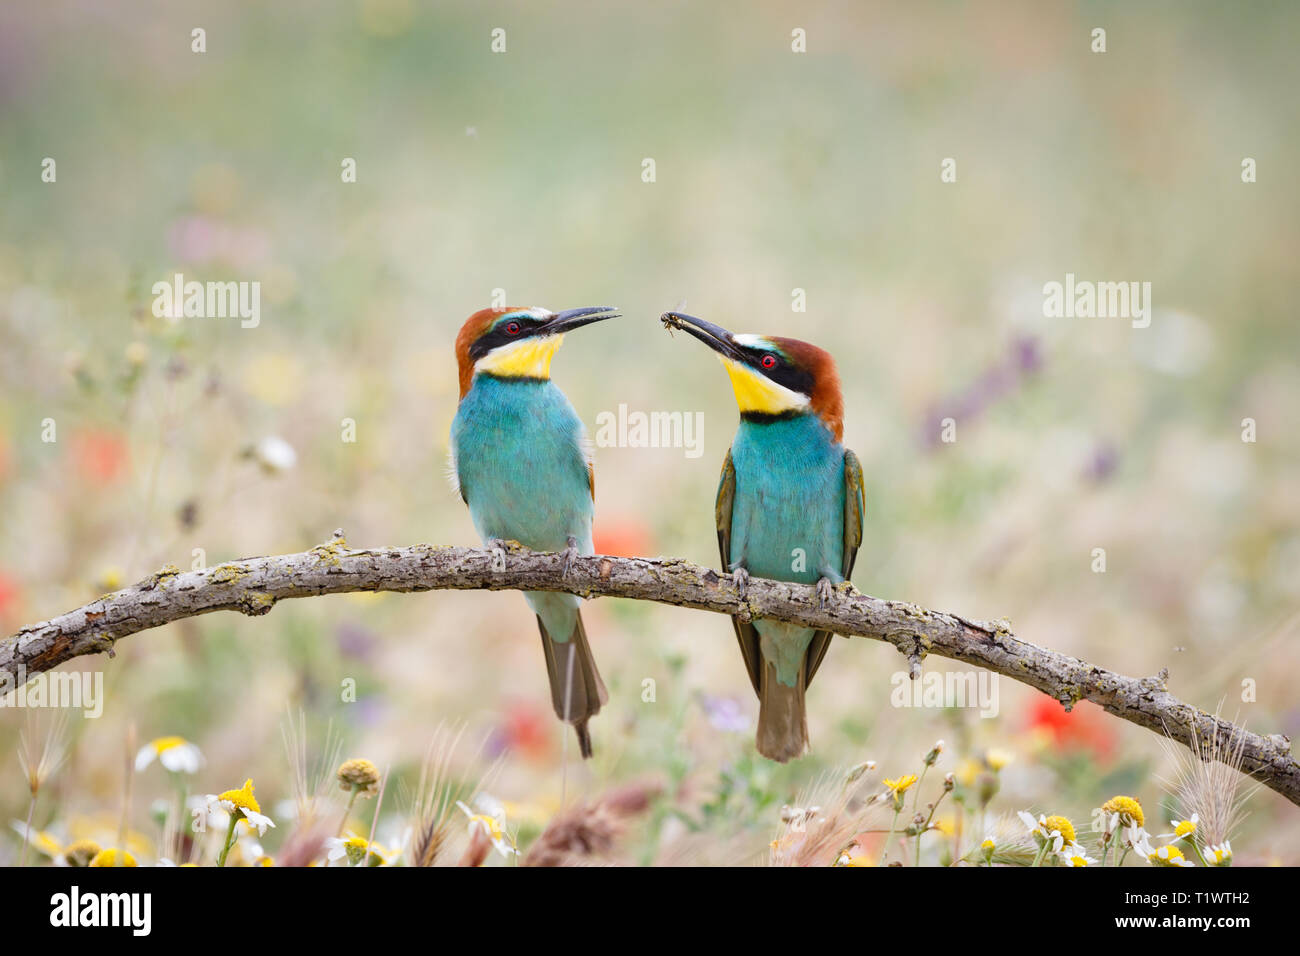 European Bee-eater (Merops apiaster), adult male offering insect prey to female, perched on branch, Lleida Steppes, Catalonia, Spain Stock Photo